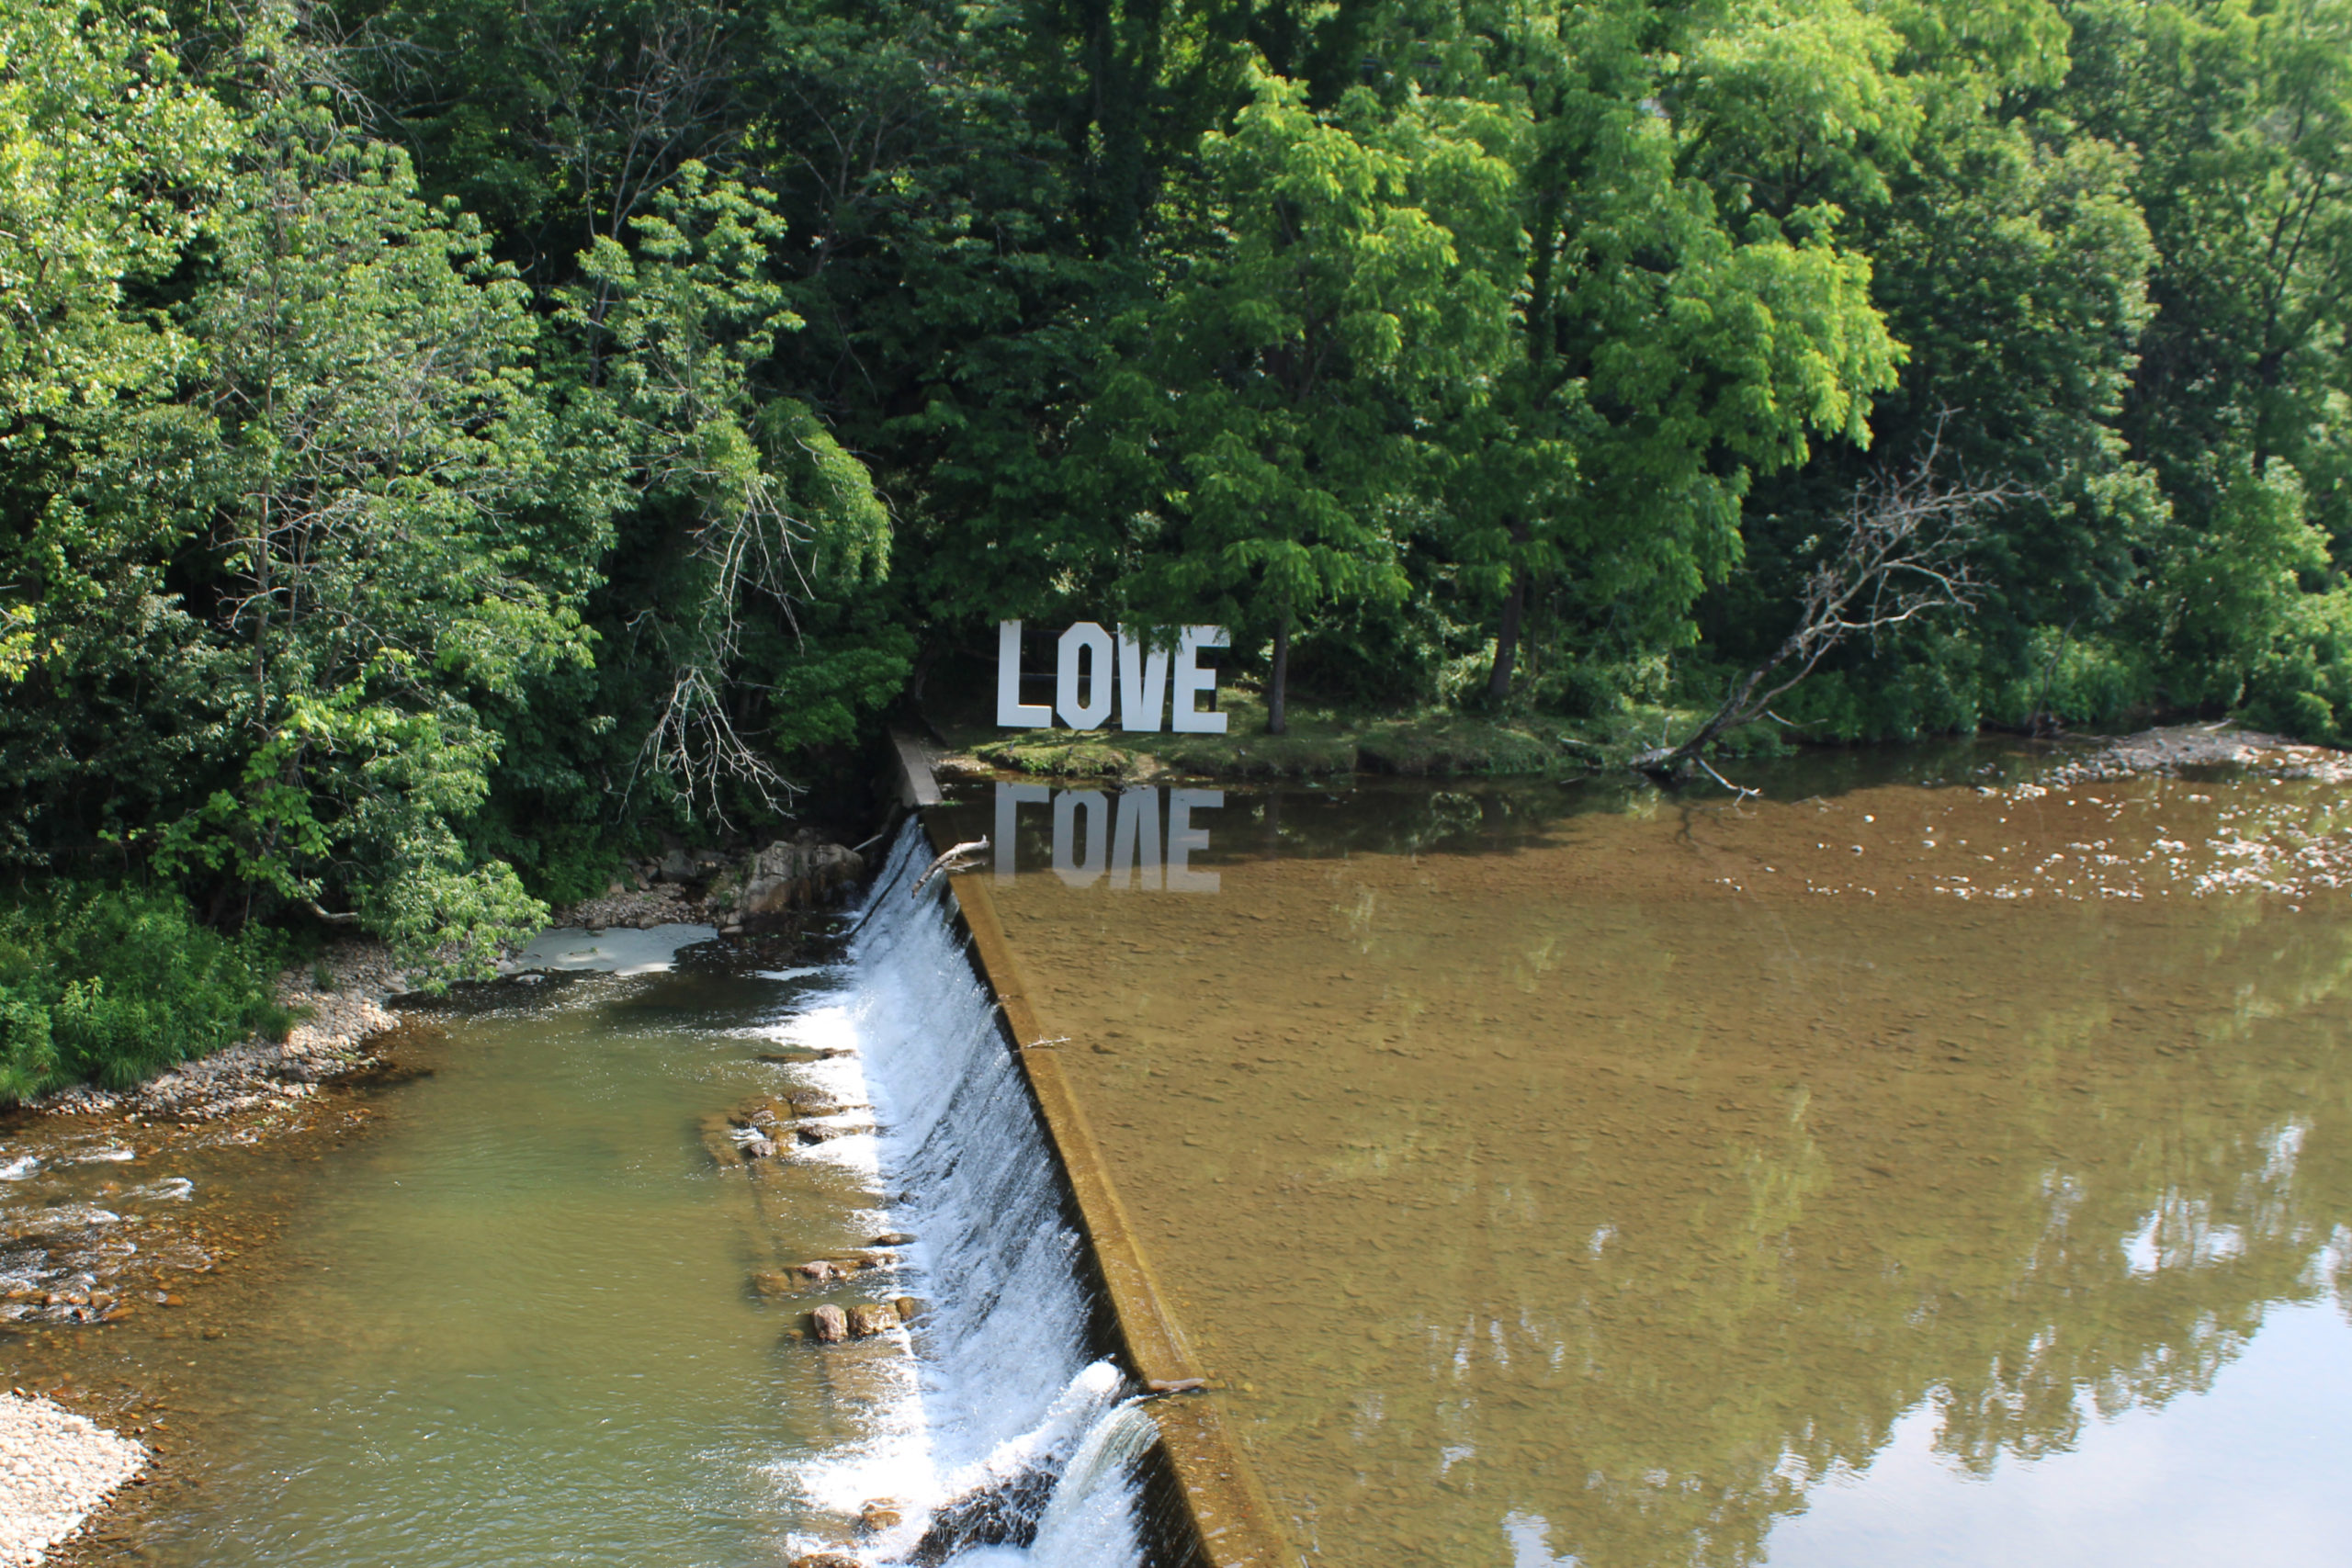 Damascus Old Mill Inn waterfall with custom LOVE sign